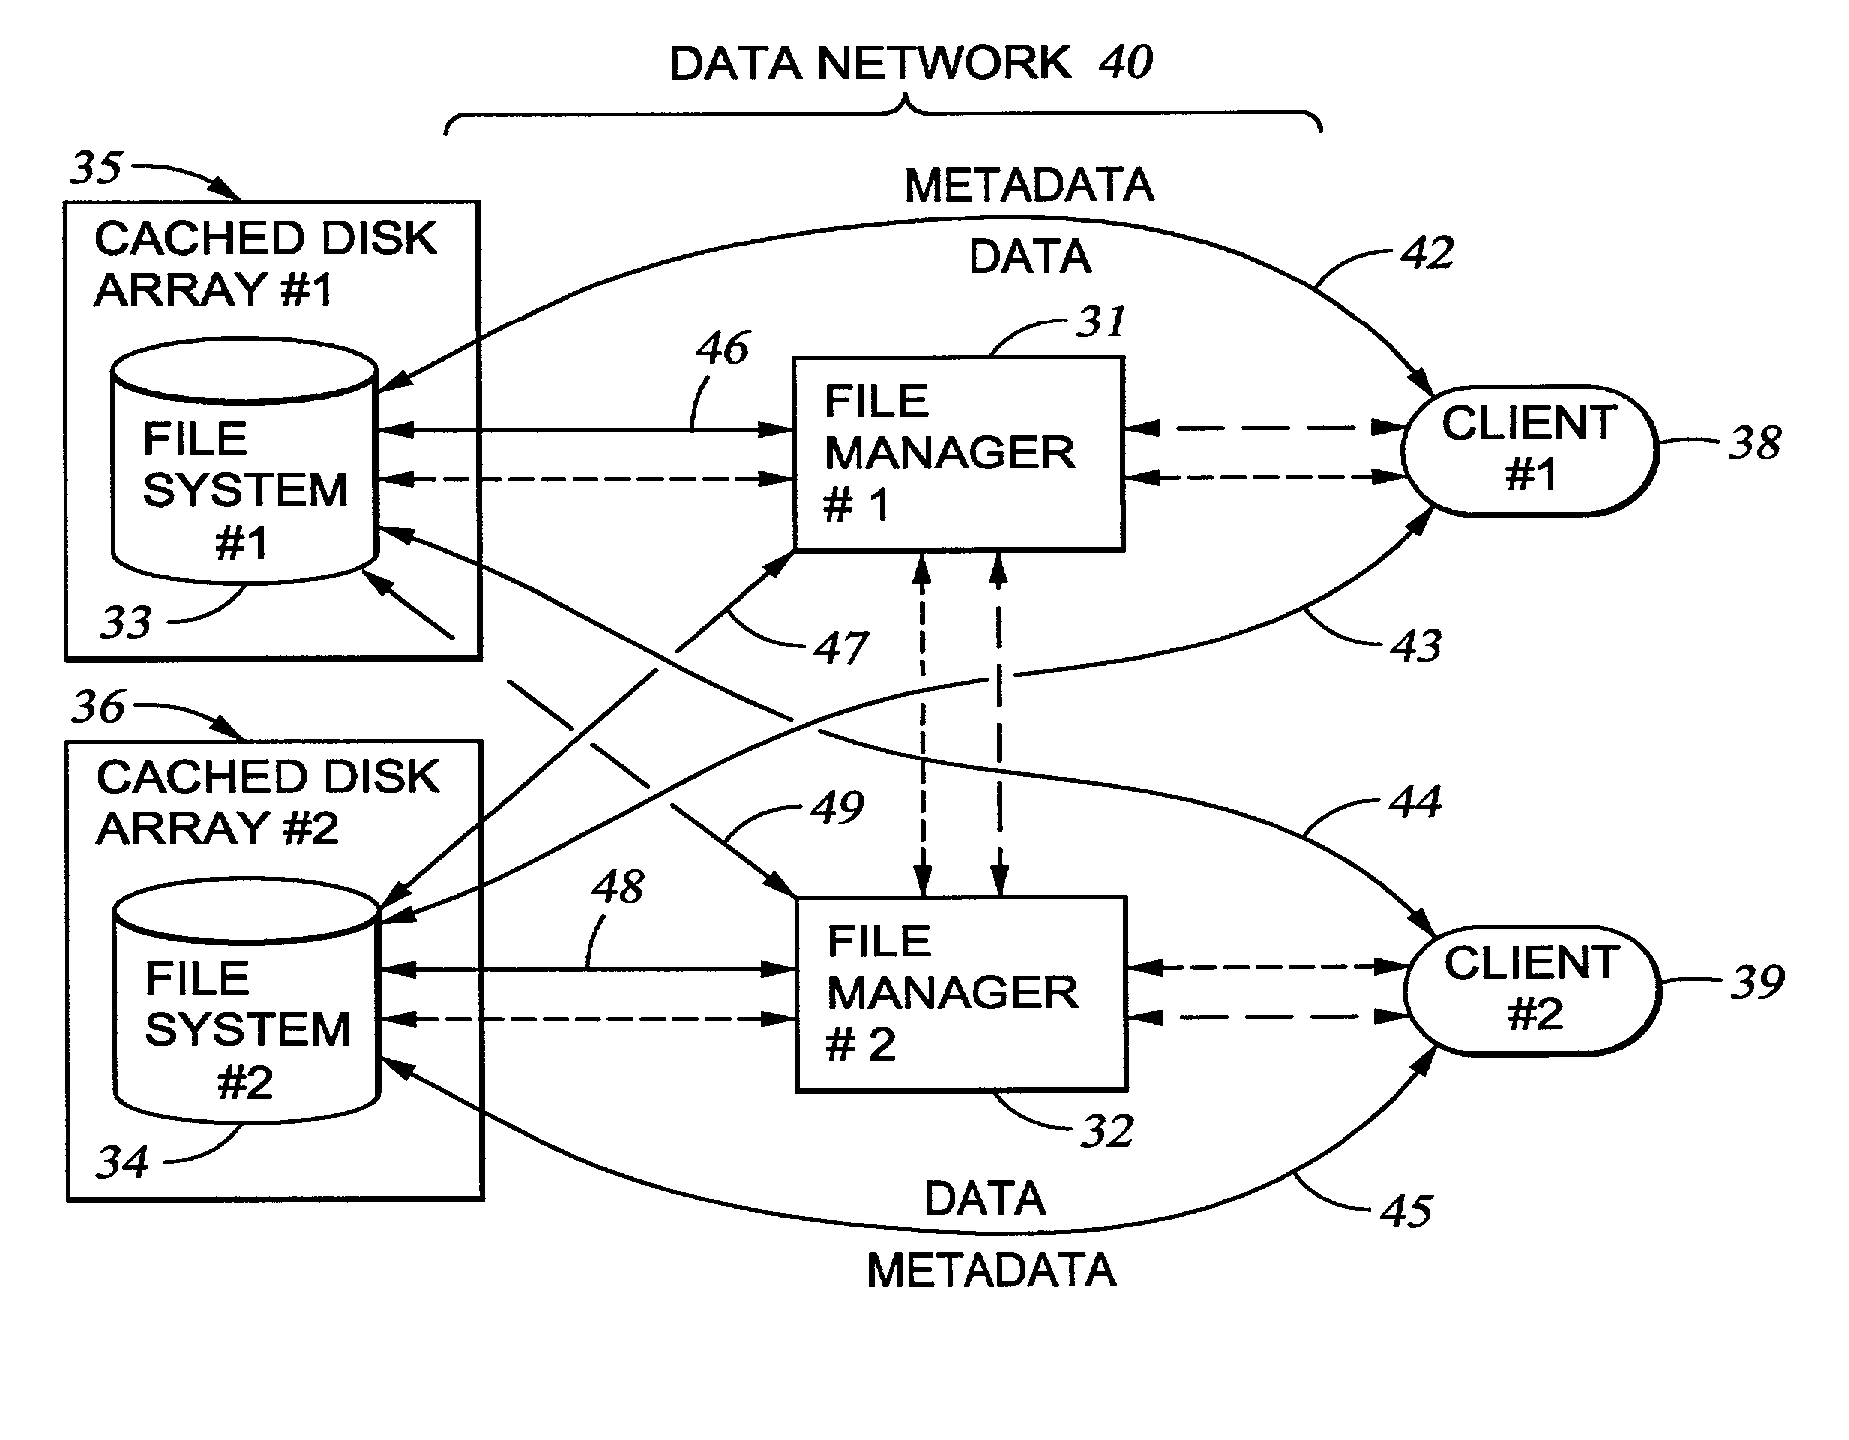 Delegation of metadata management in a storage system by leasing of free file system blocks and i-nodes from a file system owner